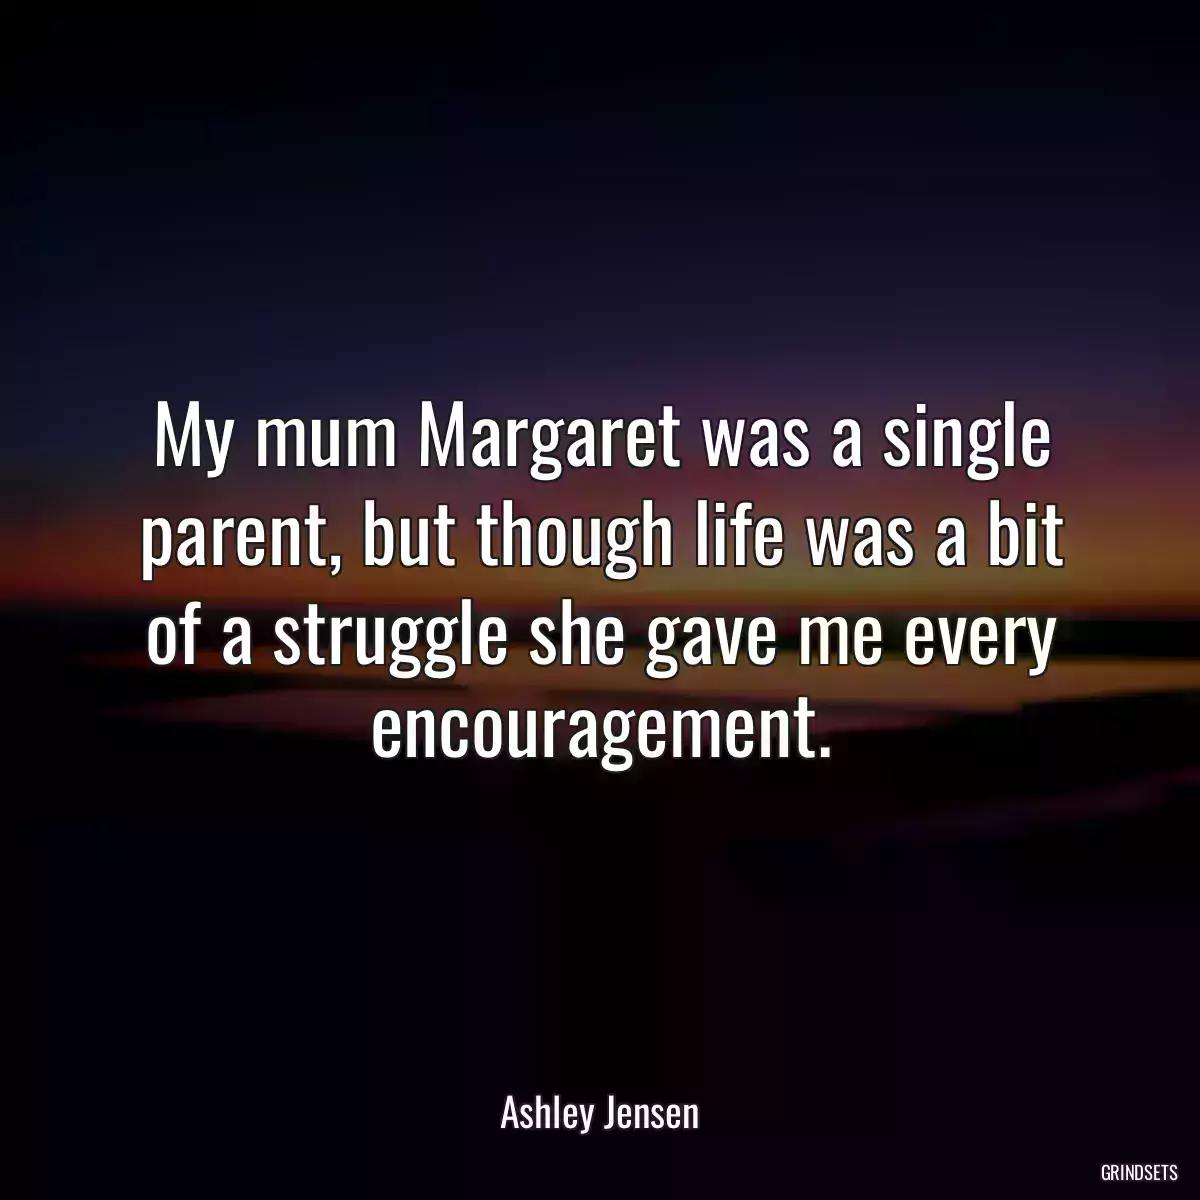 My mum Margaret was a single parent, but though life was a bit of a struggle she gave me every encouragement.